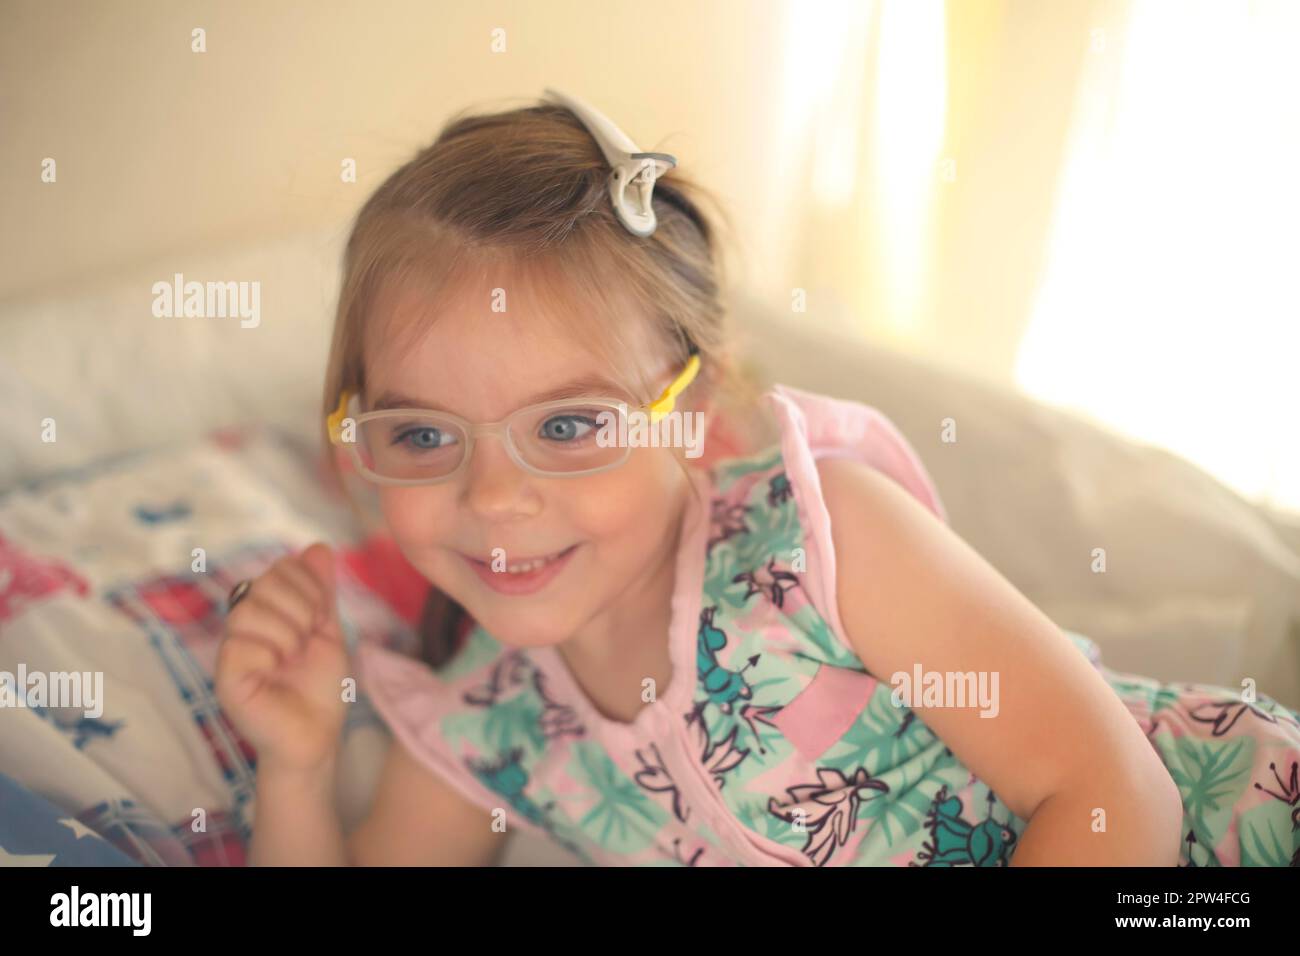 Childrens eyesight concept. Cute adorable little girl with deep blue eyes wearing eyeglasses smiling while playing at home. Happy positive kid with Stock Photo